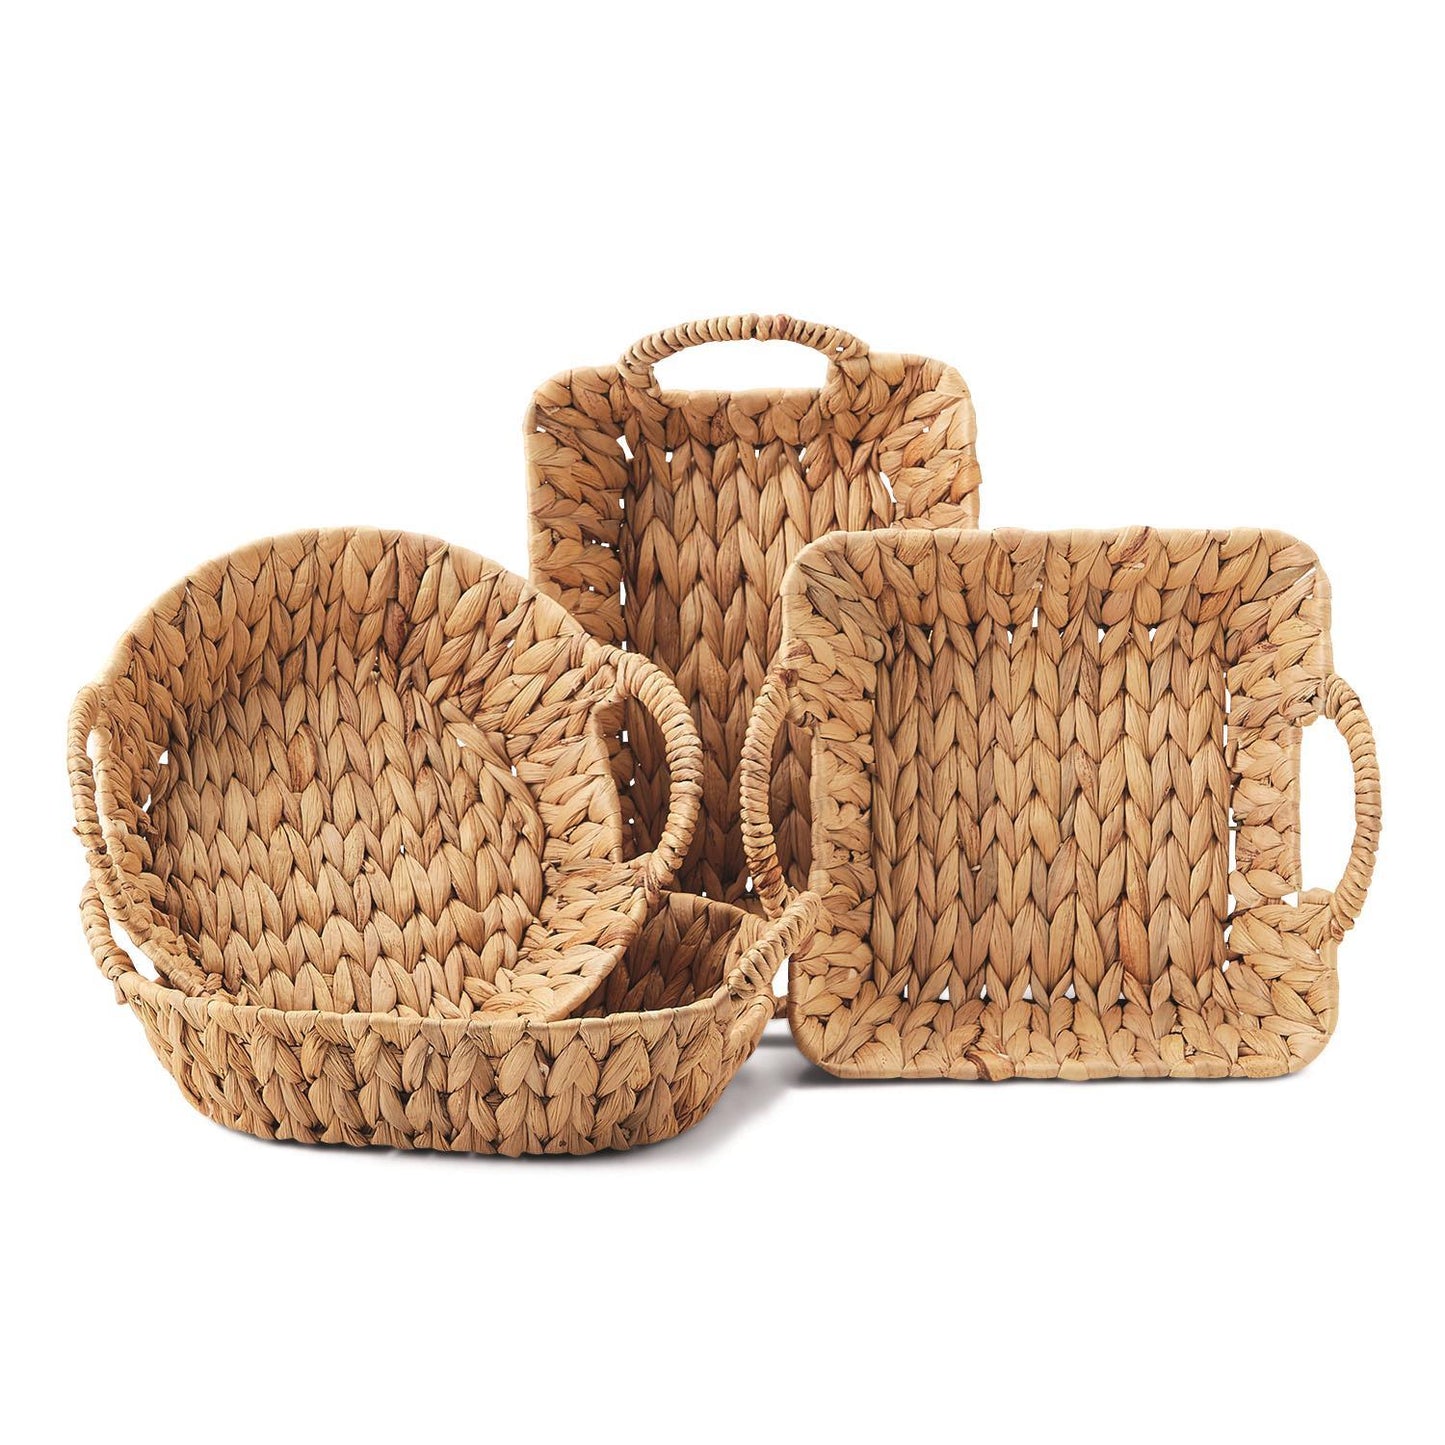 Weaving Basket - Rectangle Gifts Two's Company   